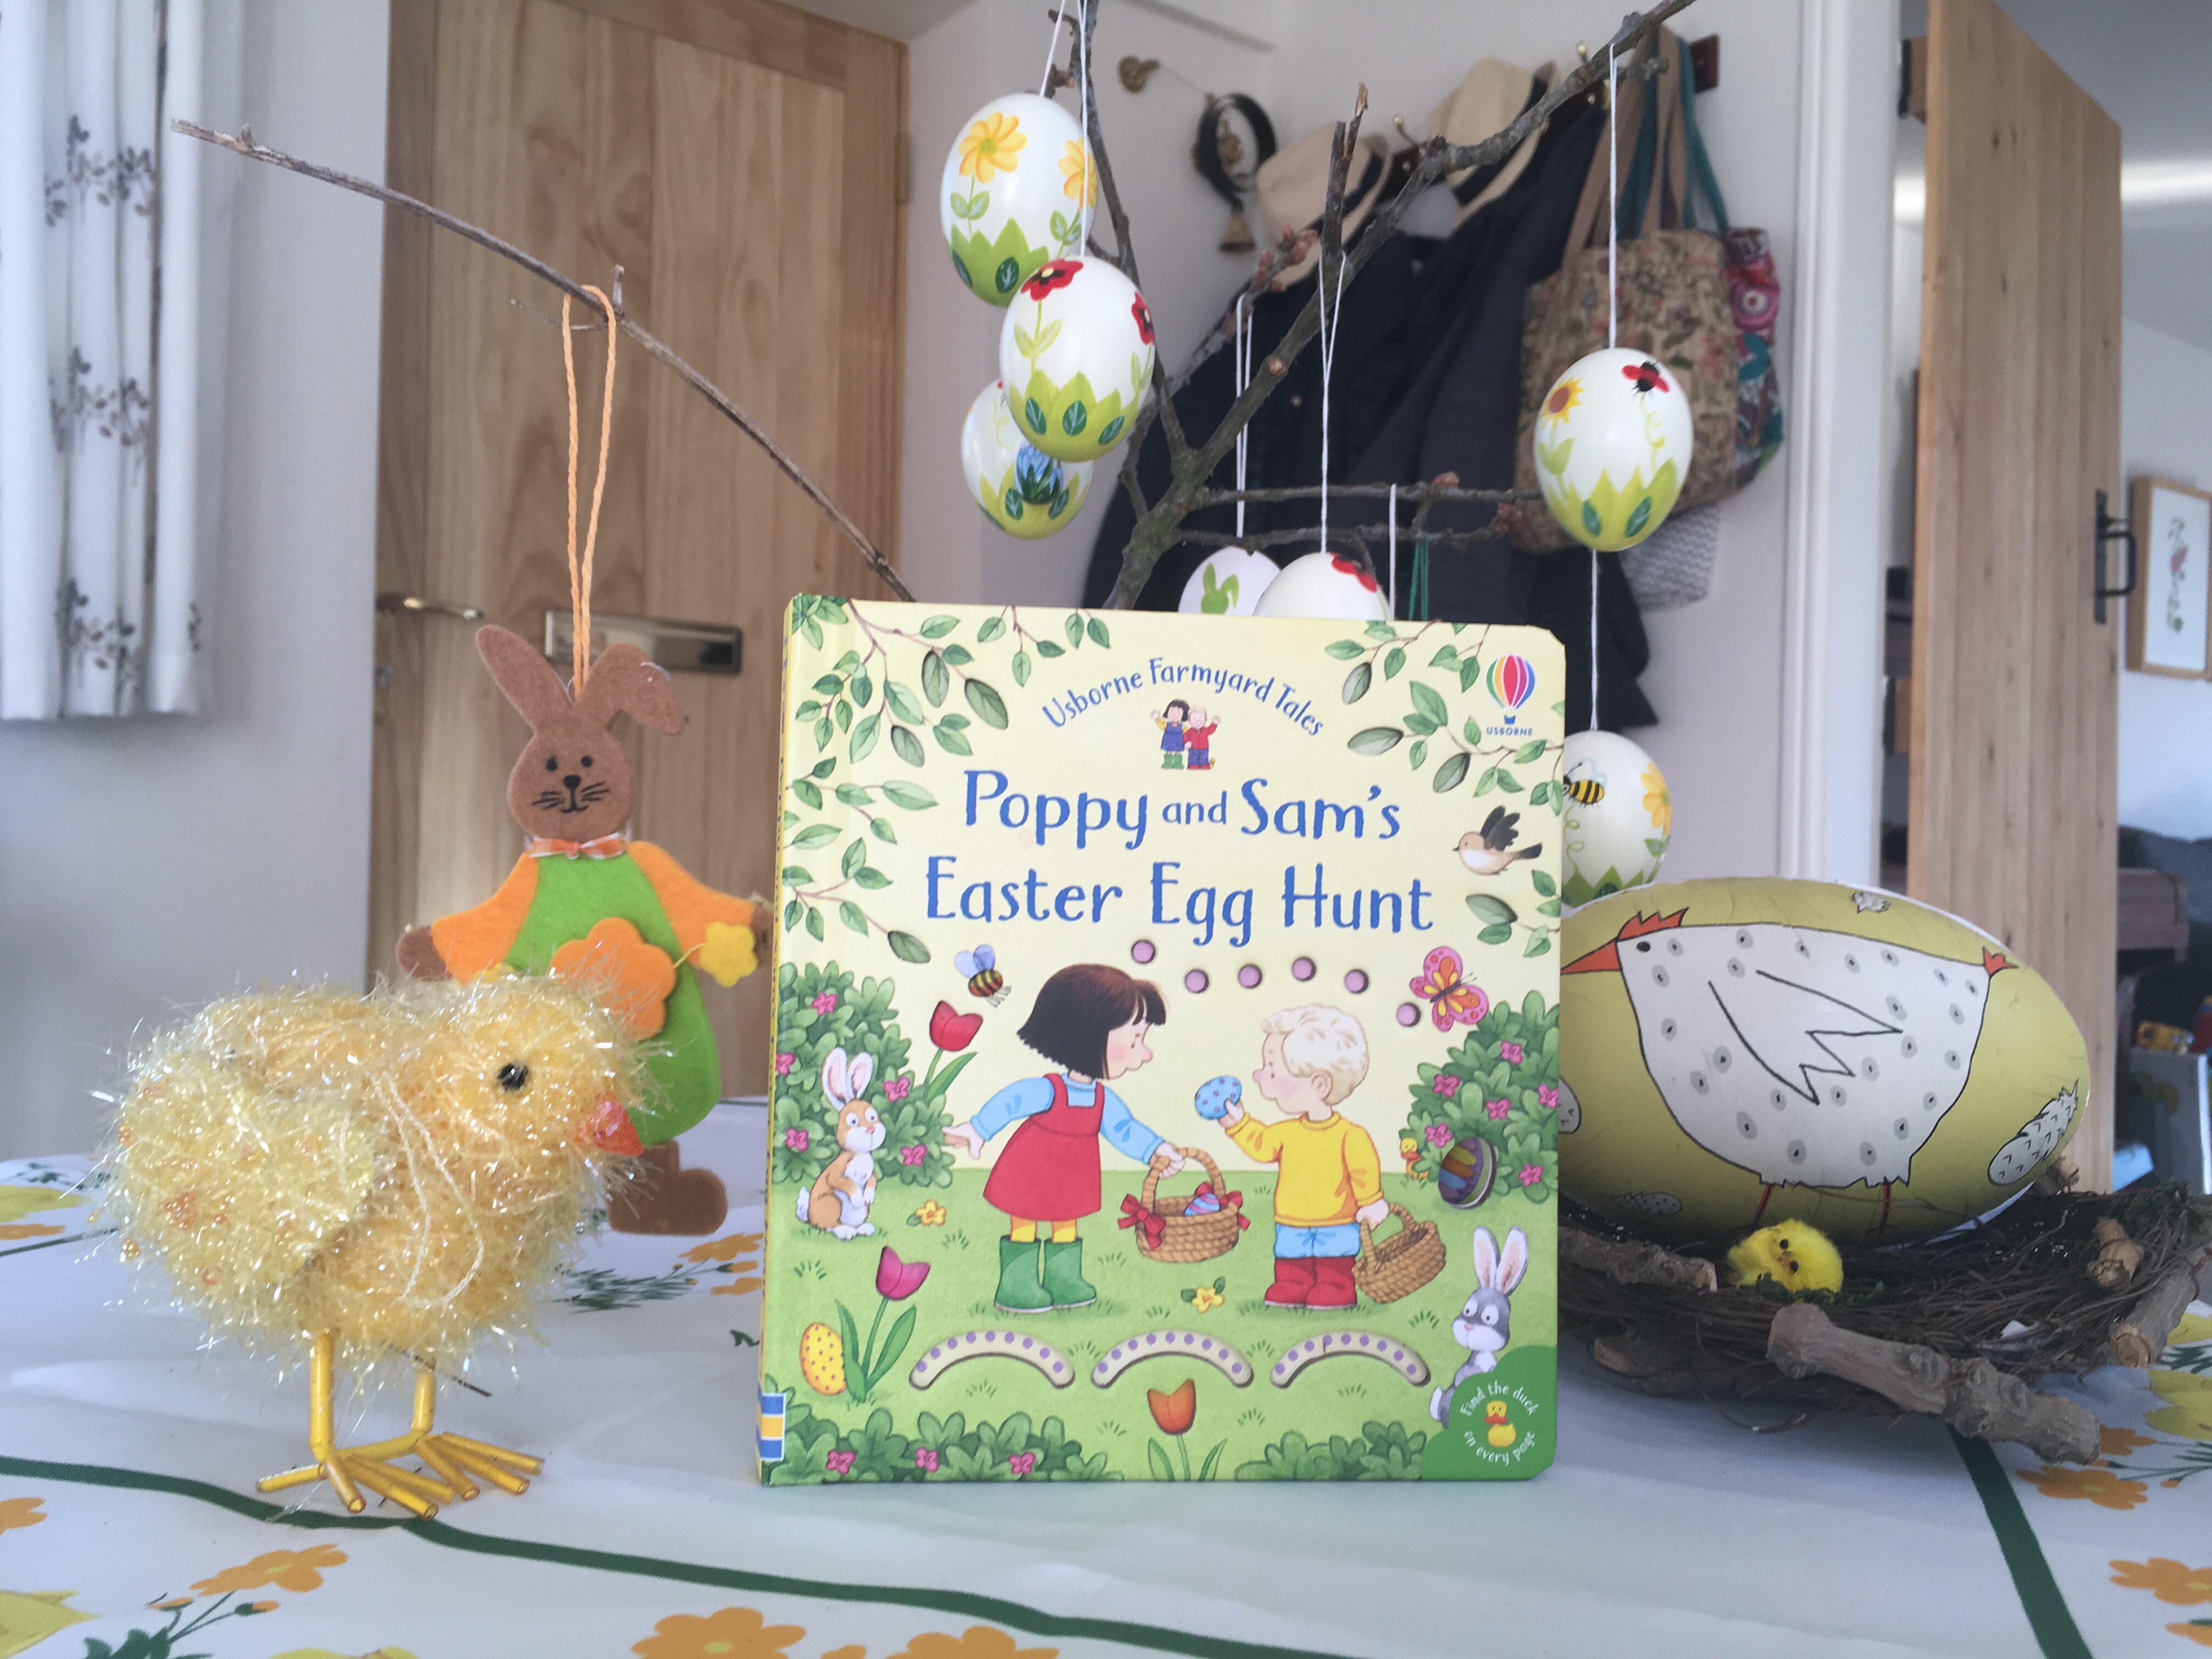 THE EGGCELLENT HIDE & SEEK GAME - The Toy Book